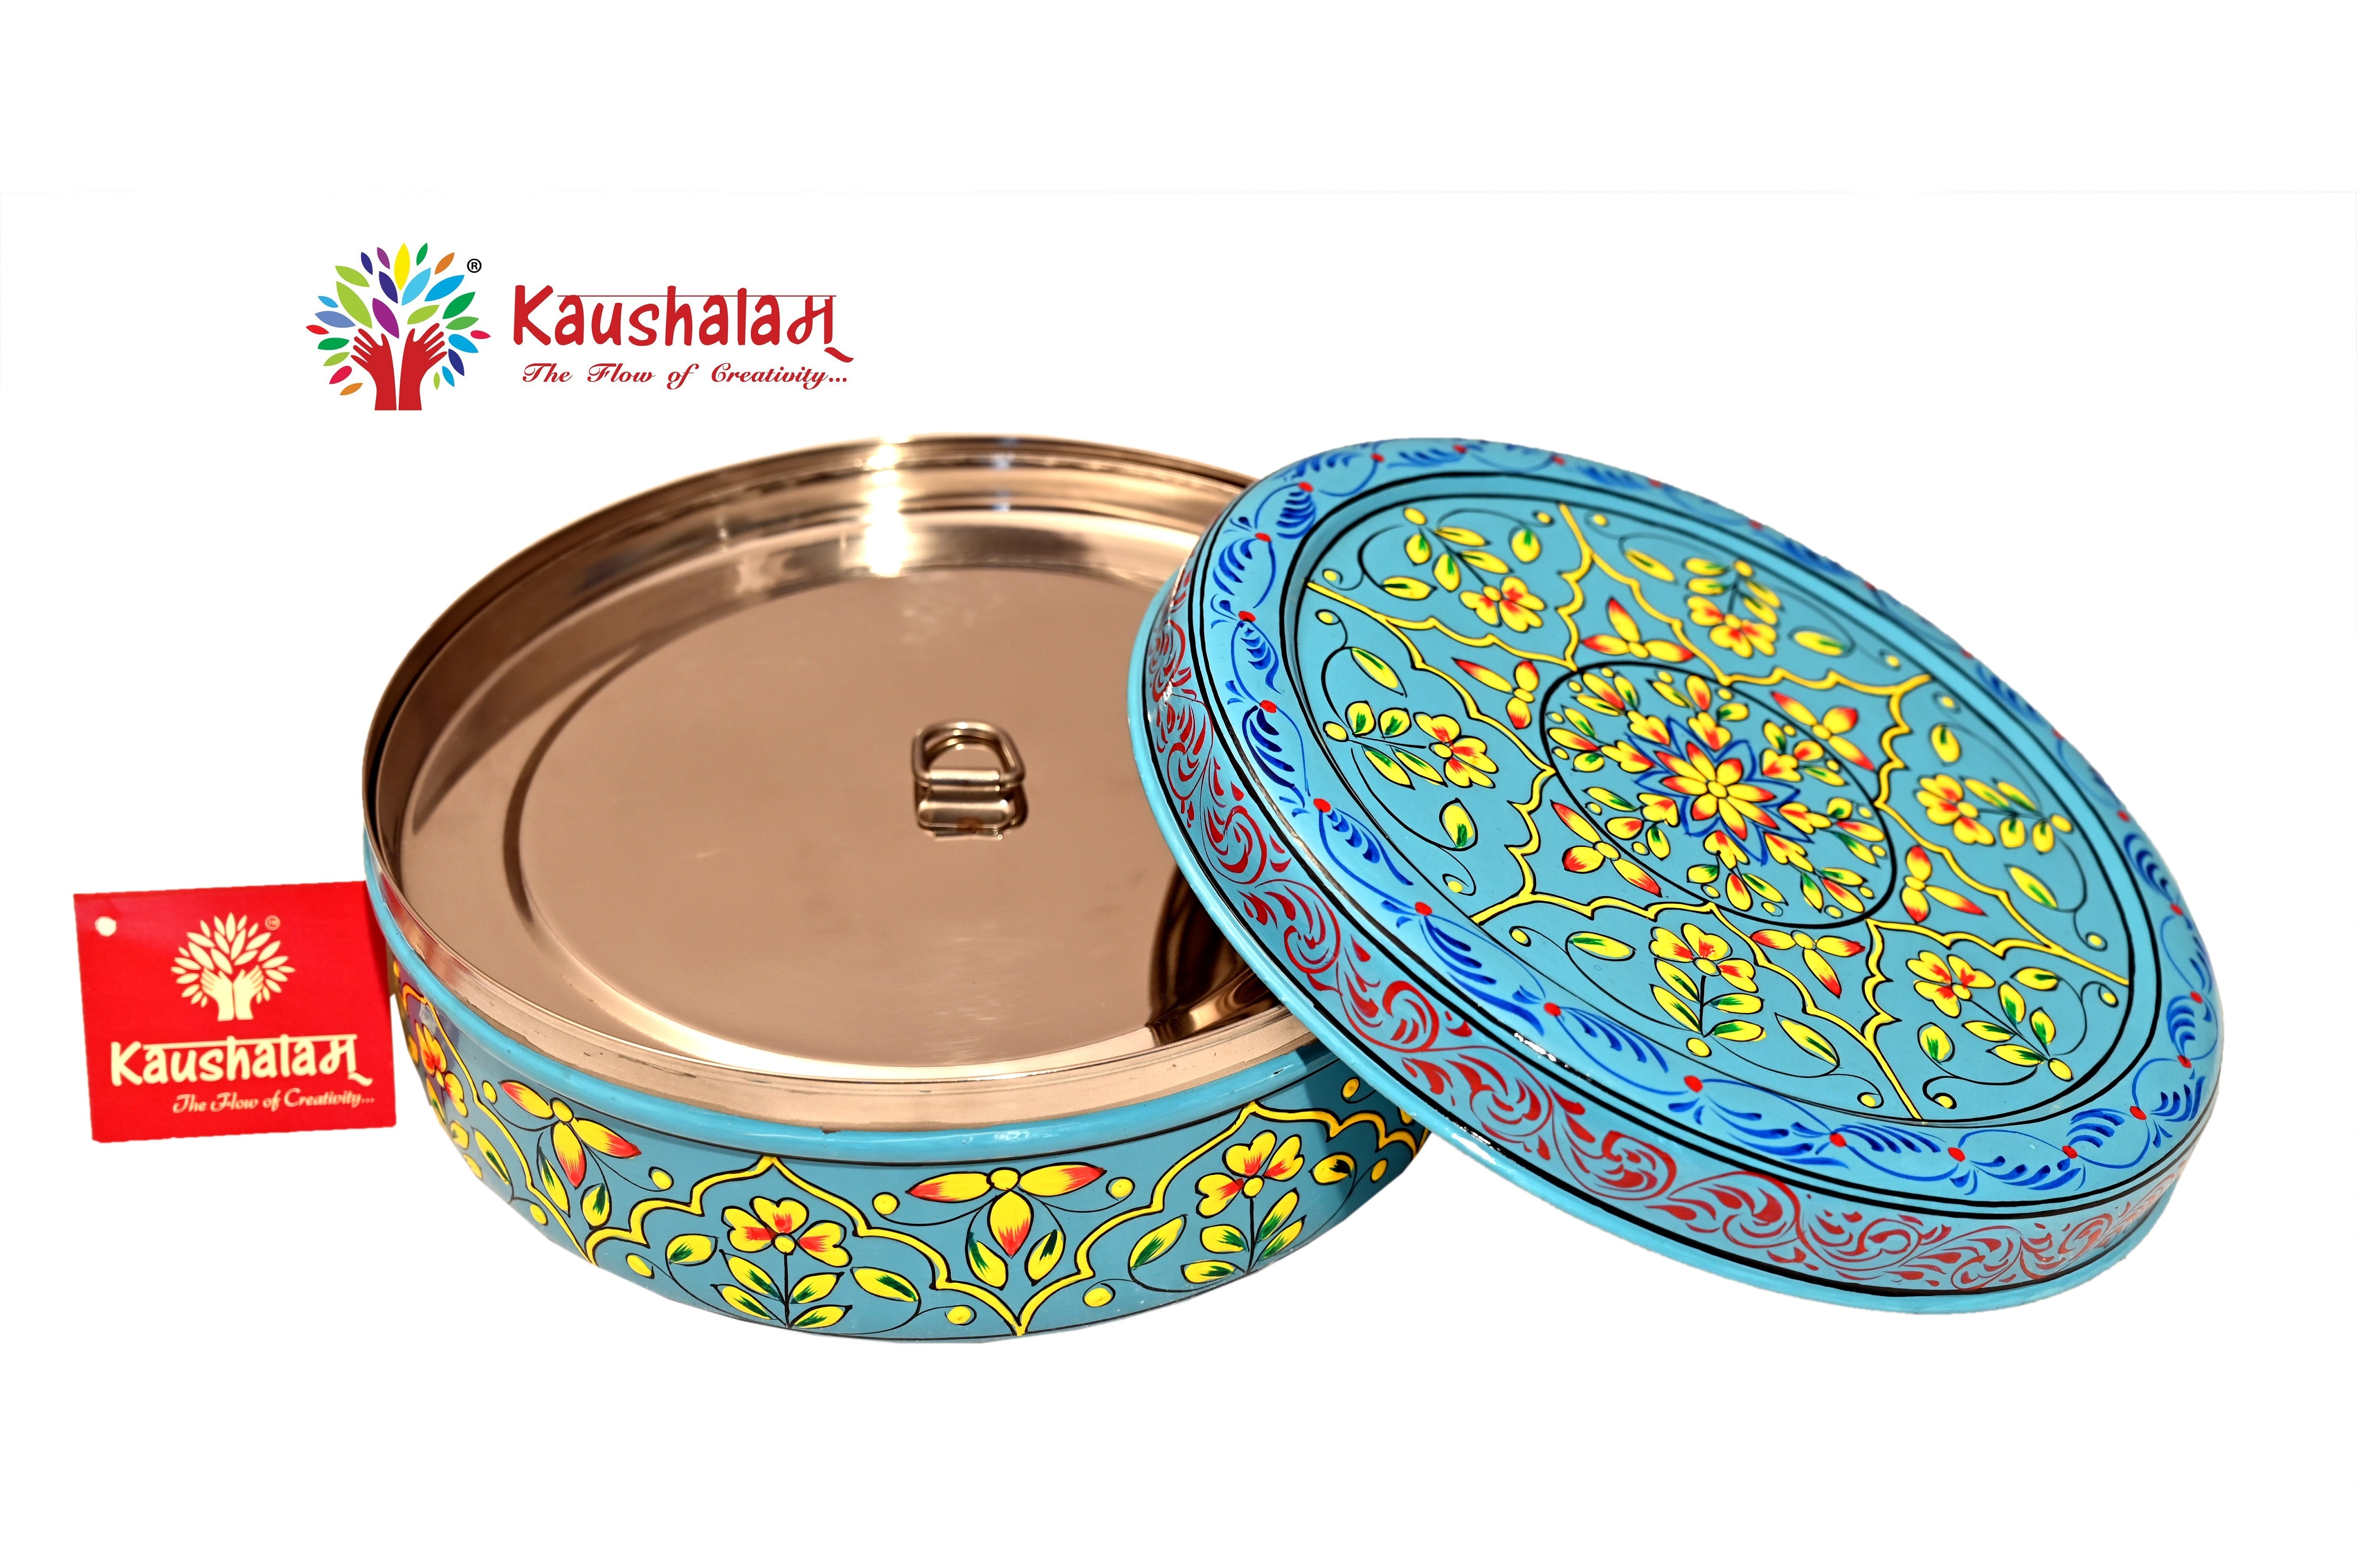 Hand Painted Spice Box - Turquoise Masala Box, Spice Containers, Indian Masala Daani